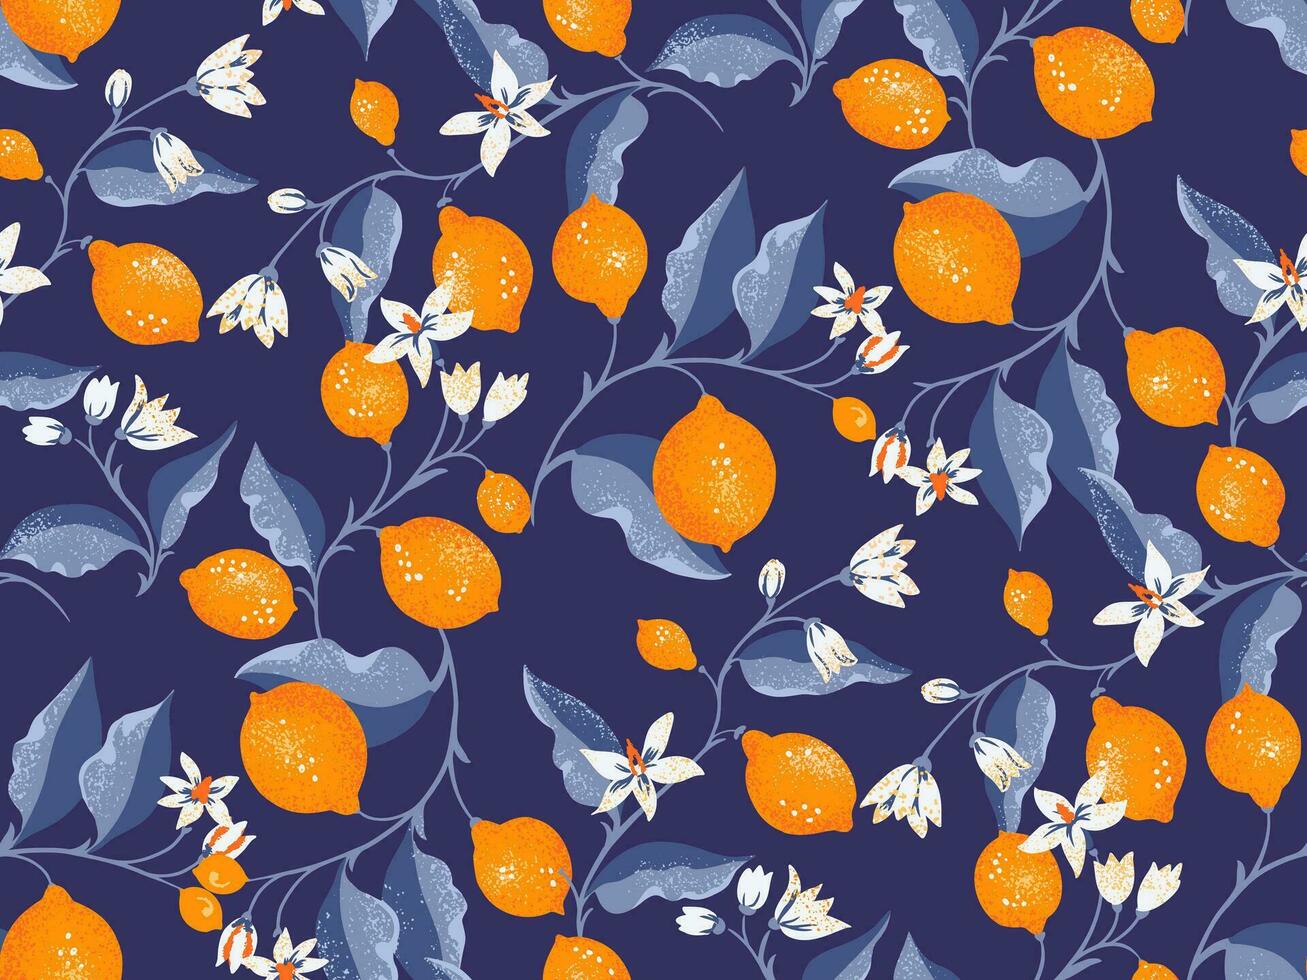 Creative bright lime and lemon branches seamless pattern on a blue background. Vector hand drawn sketch doodle. Summer citrus fruits illustration for print. Design fo textile, fashion, fabric